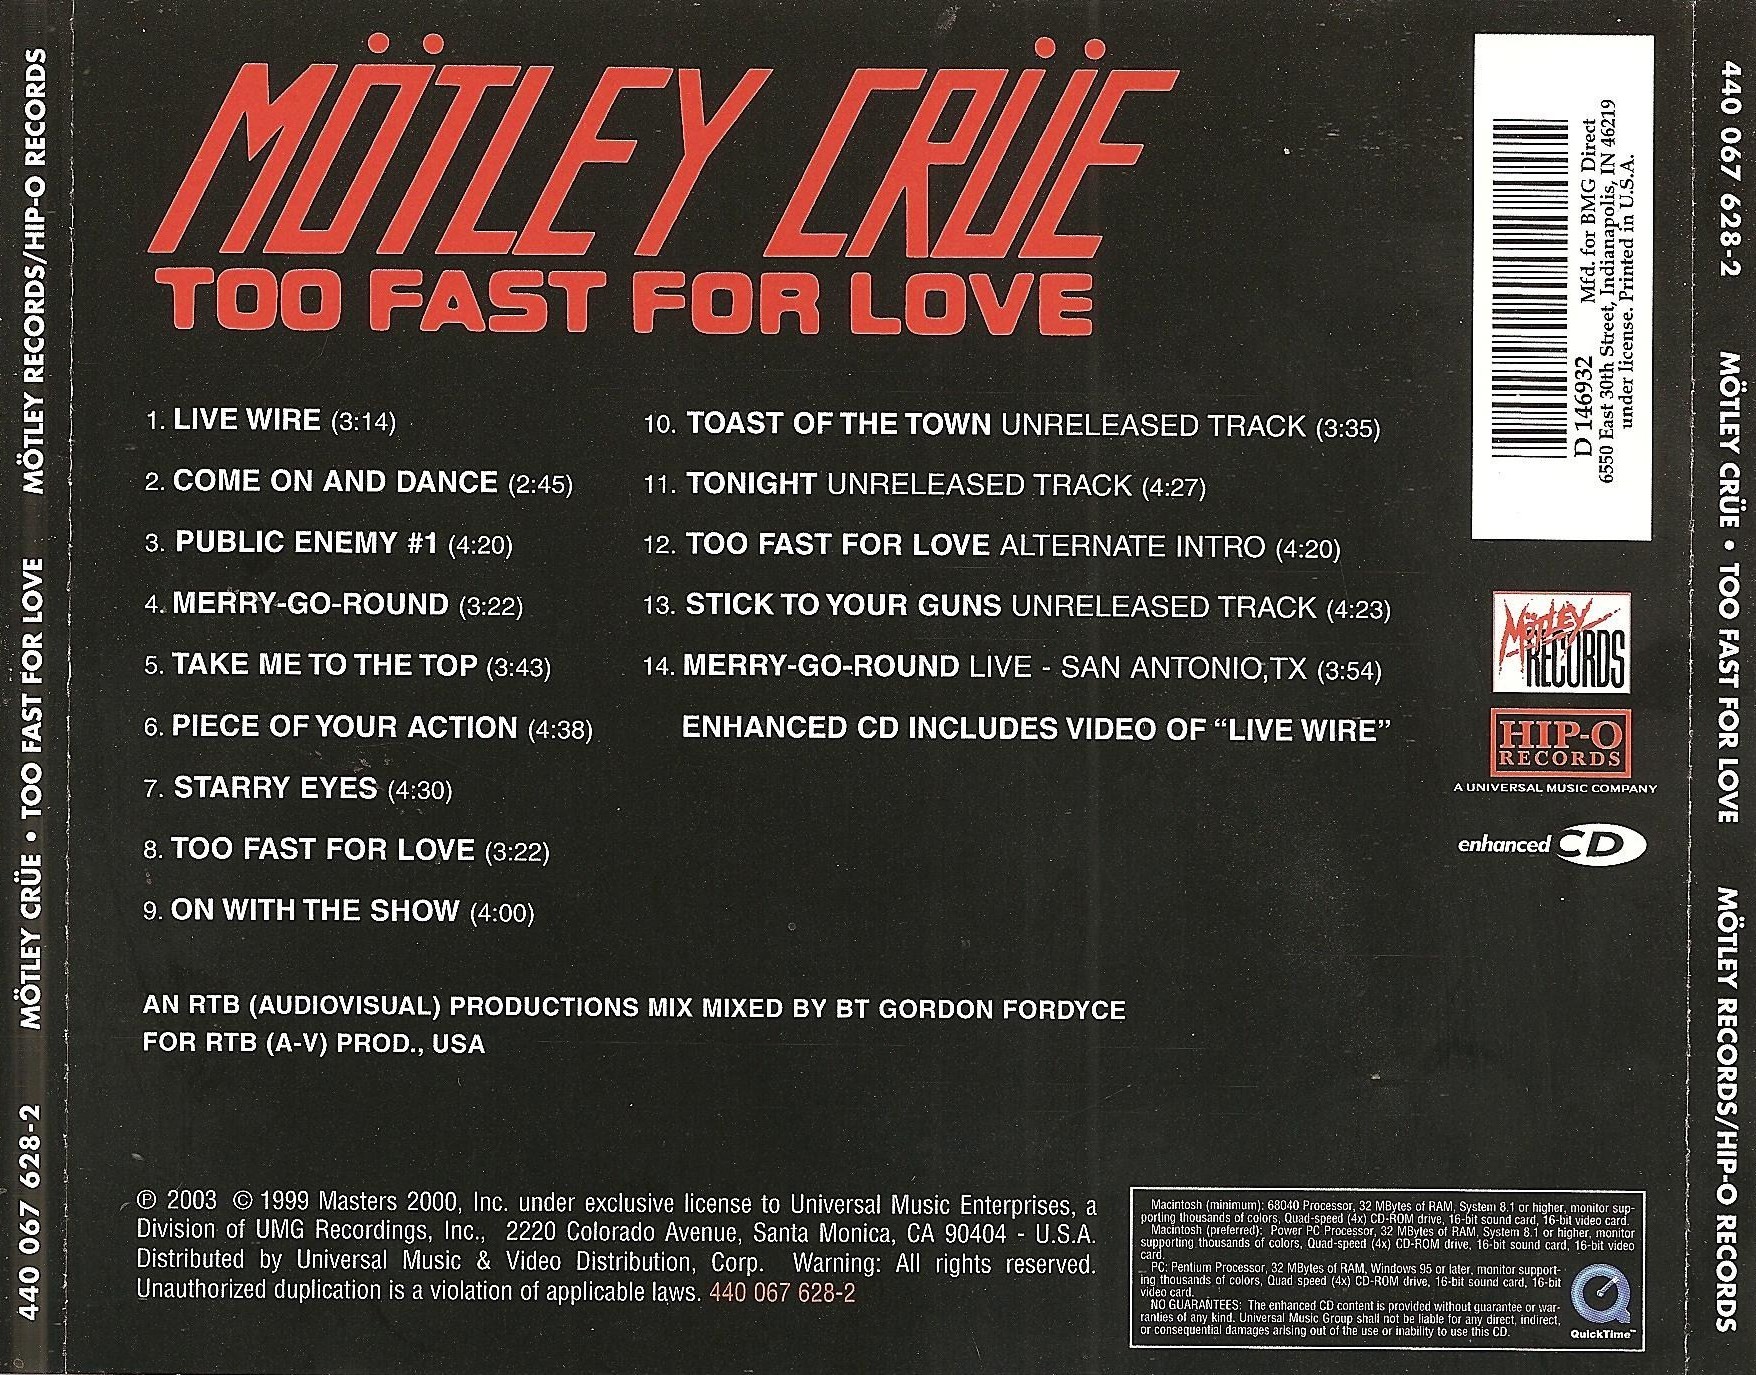 Mötley Crüe - Too Fast For Love -  Music